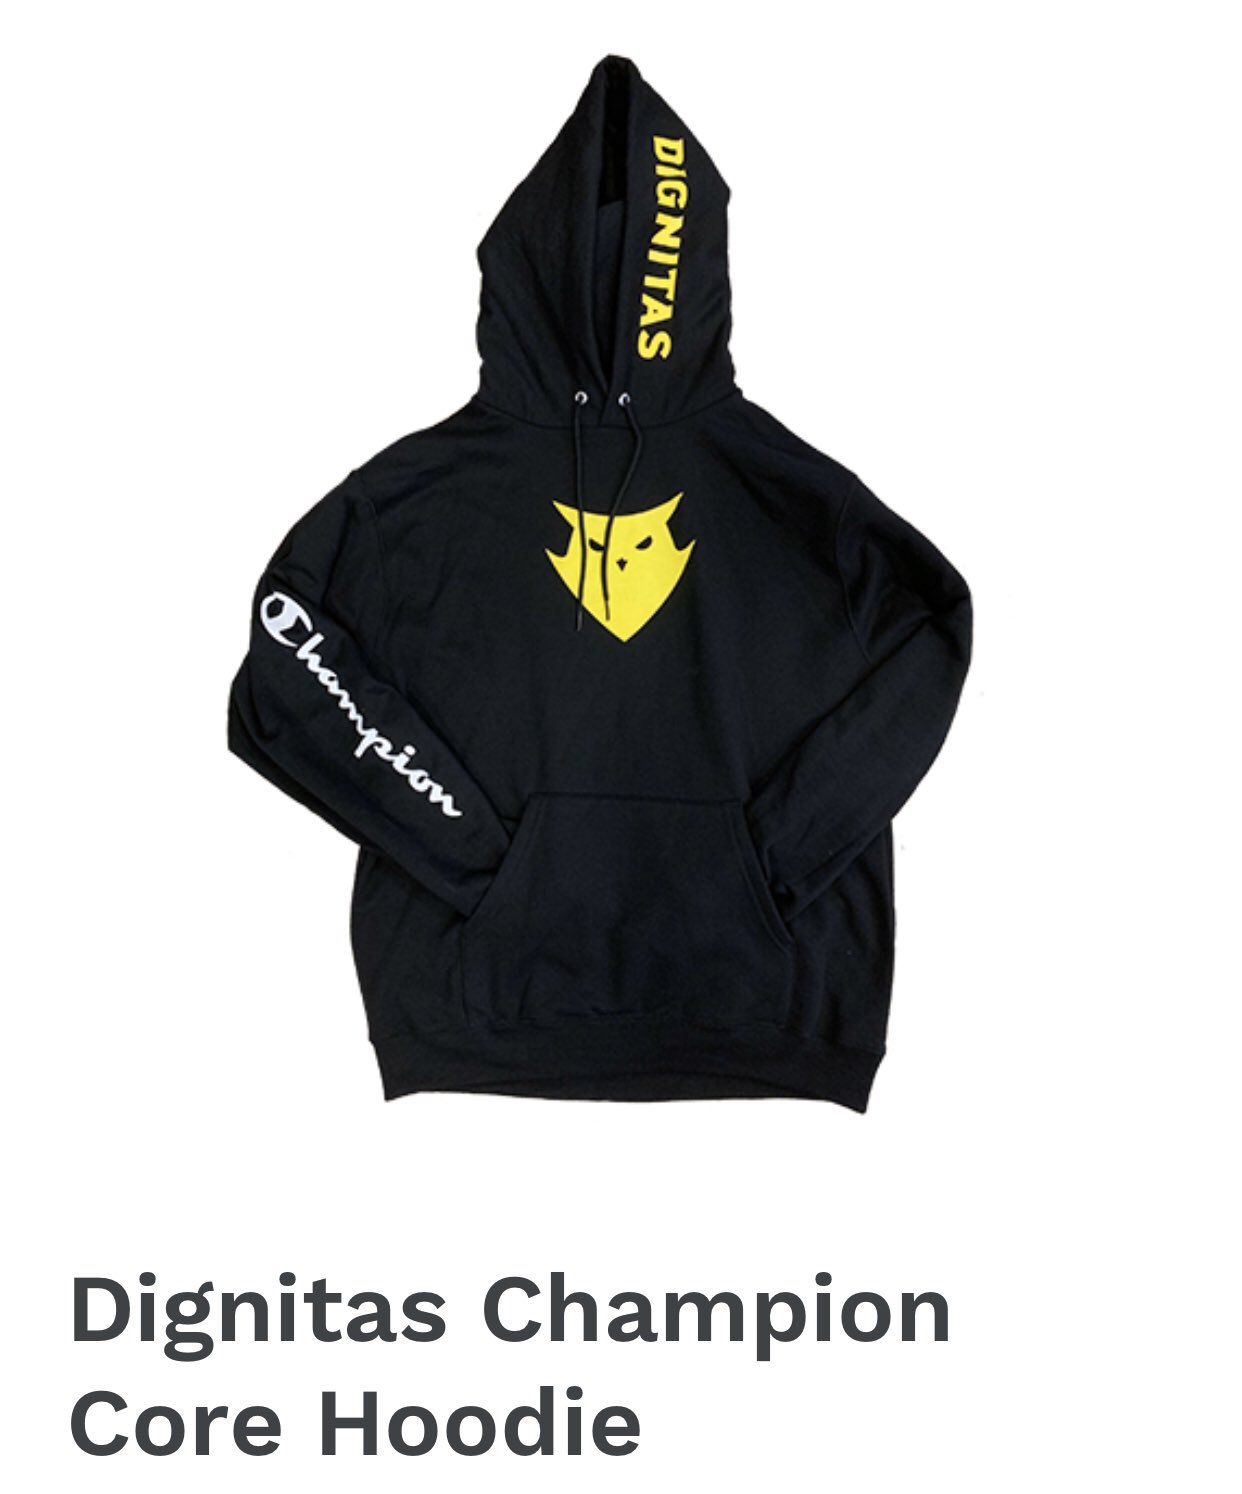 Dignitas on Twitter: "Get your @ChampionUSA x Dignitas Core Collection  today! 🛒 https://t.co/bX4WawV8R1 https://t.co/gZx1TCMOrb" / Twitter